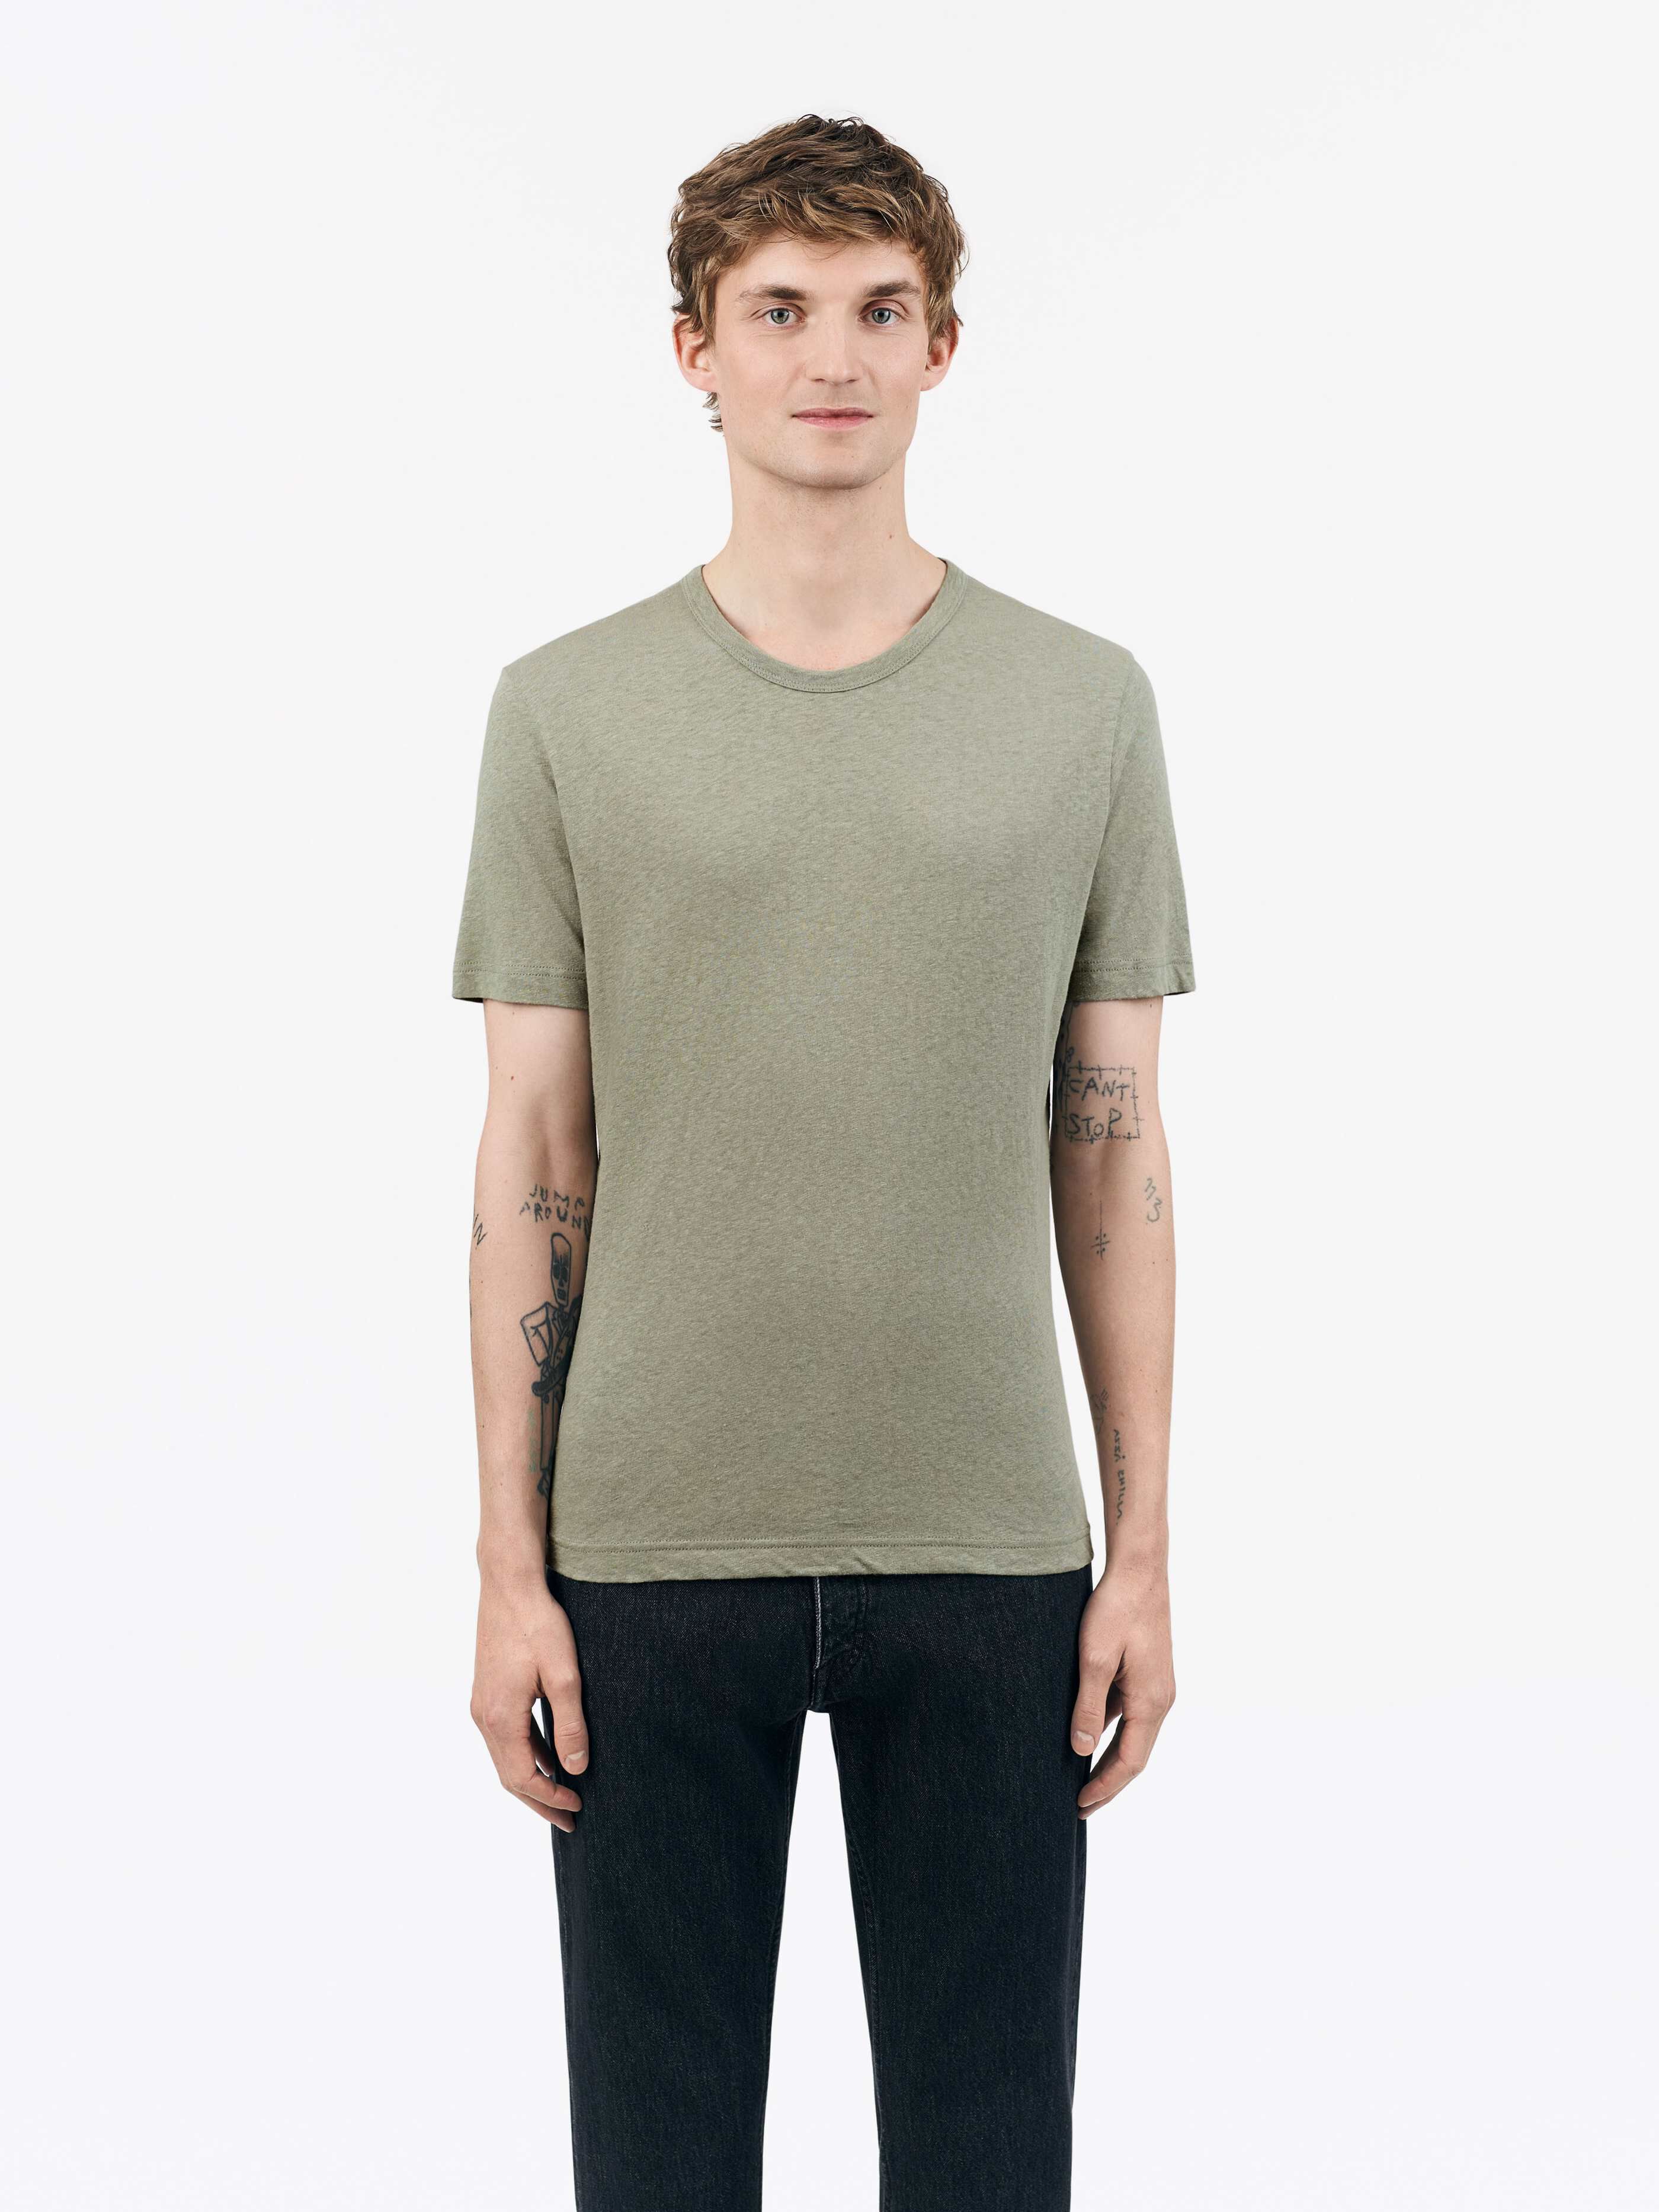 TIGER OF SWEDEN Olaf T-Shirt  in Green T72271001 | Shop from eightywingold an official brand partner for Tiger of Sweden Canada and US.